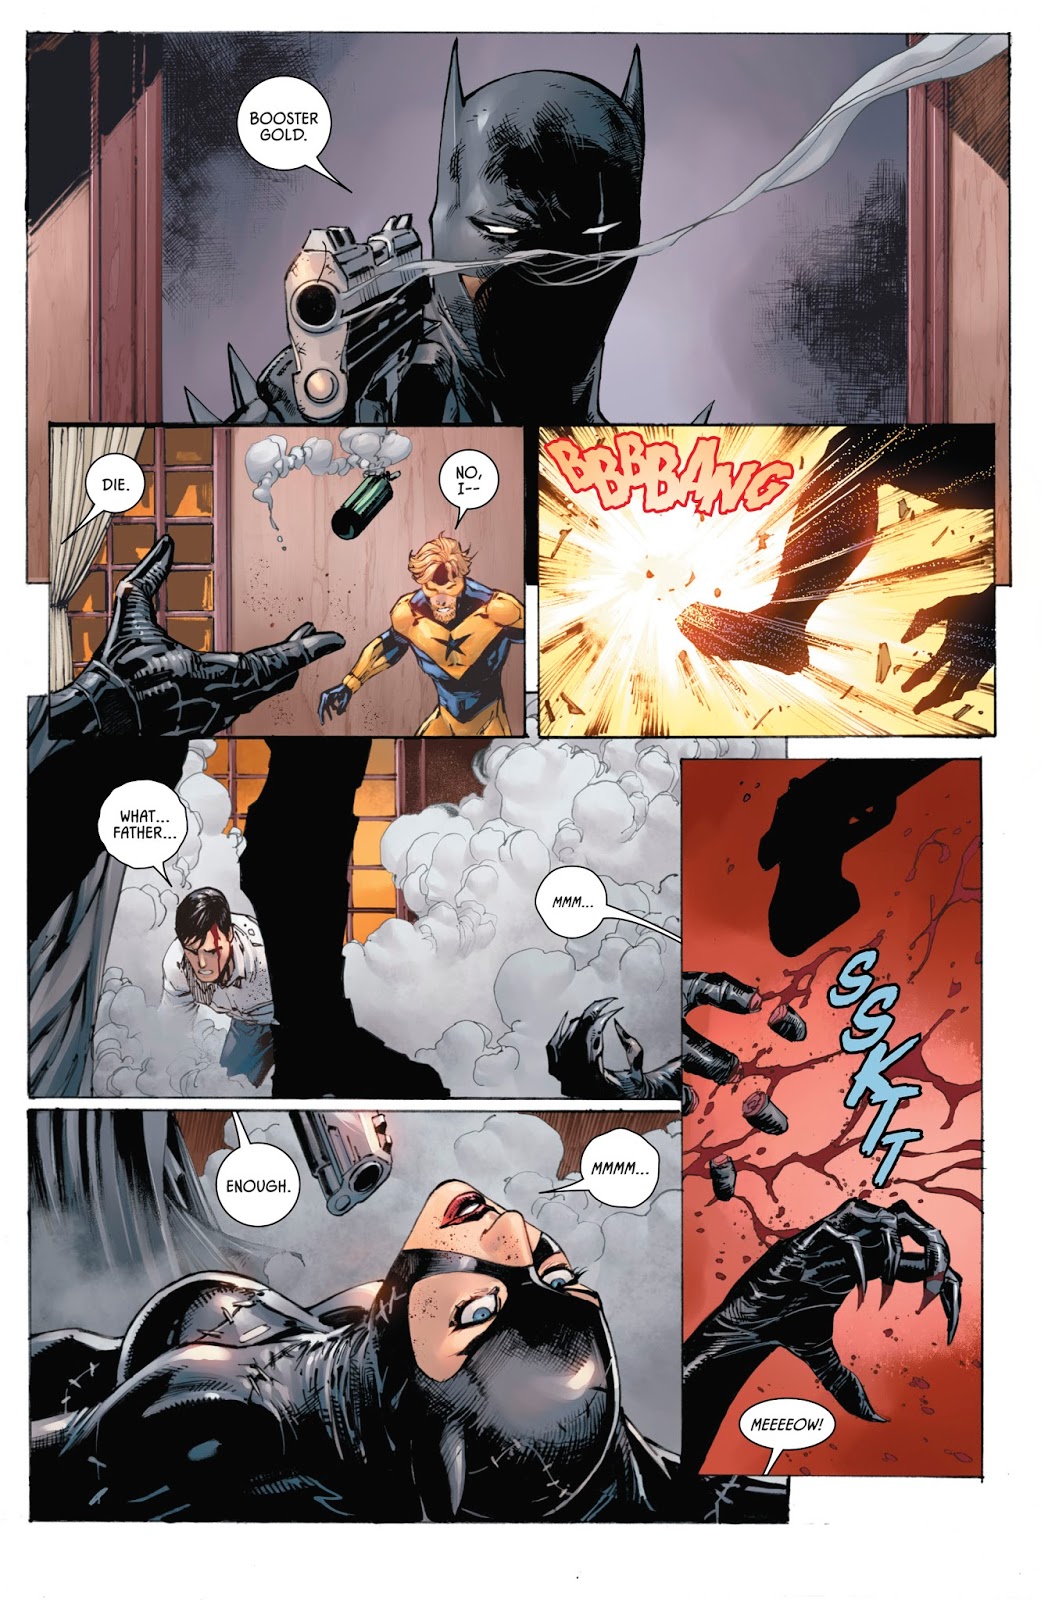 Bruce Wayne Loses His Parents (Boosterpoint)